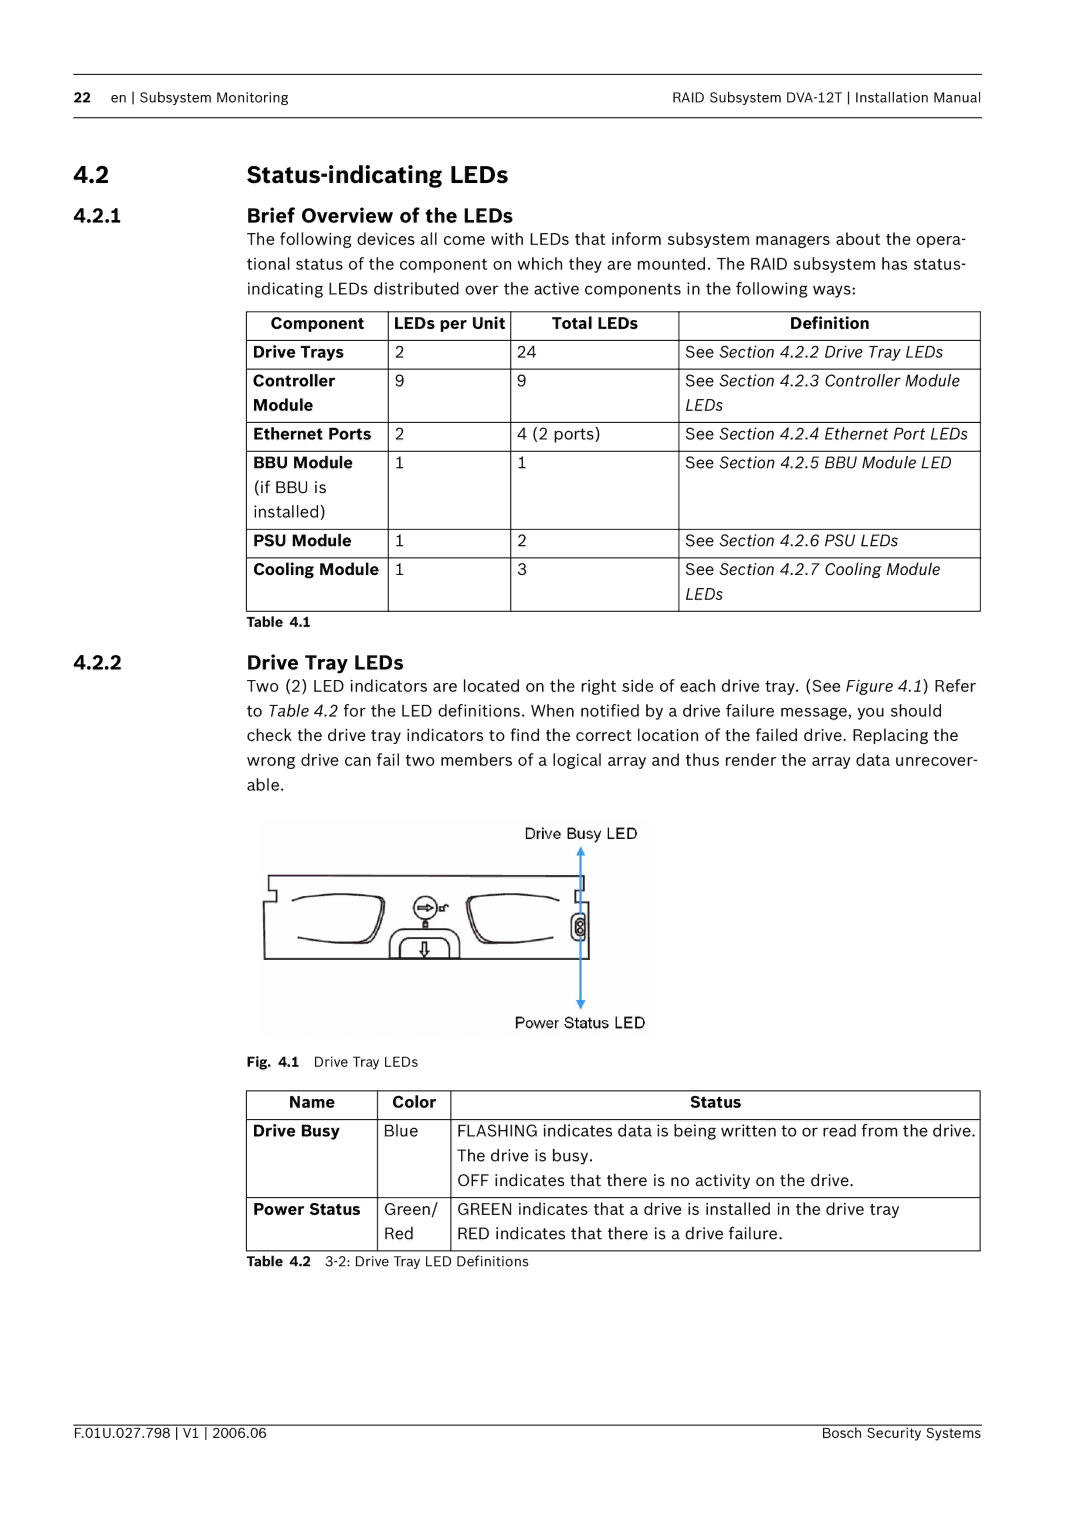 Bosch Appliances DVA-12T installation manual Status-indicating LEDs, Brief Overview of the LEDs, Drive Tray LEDs 